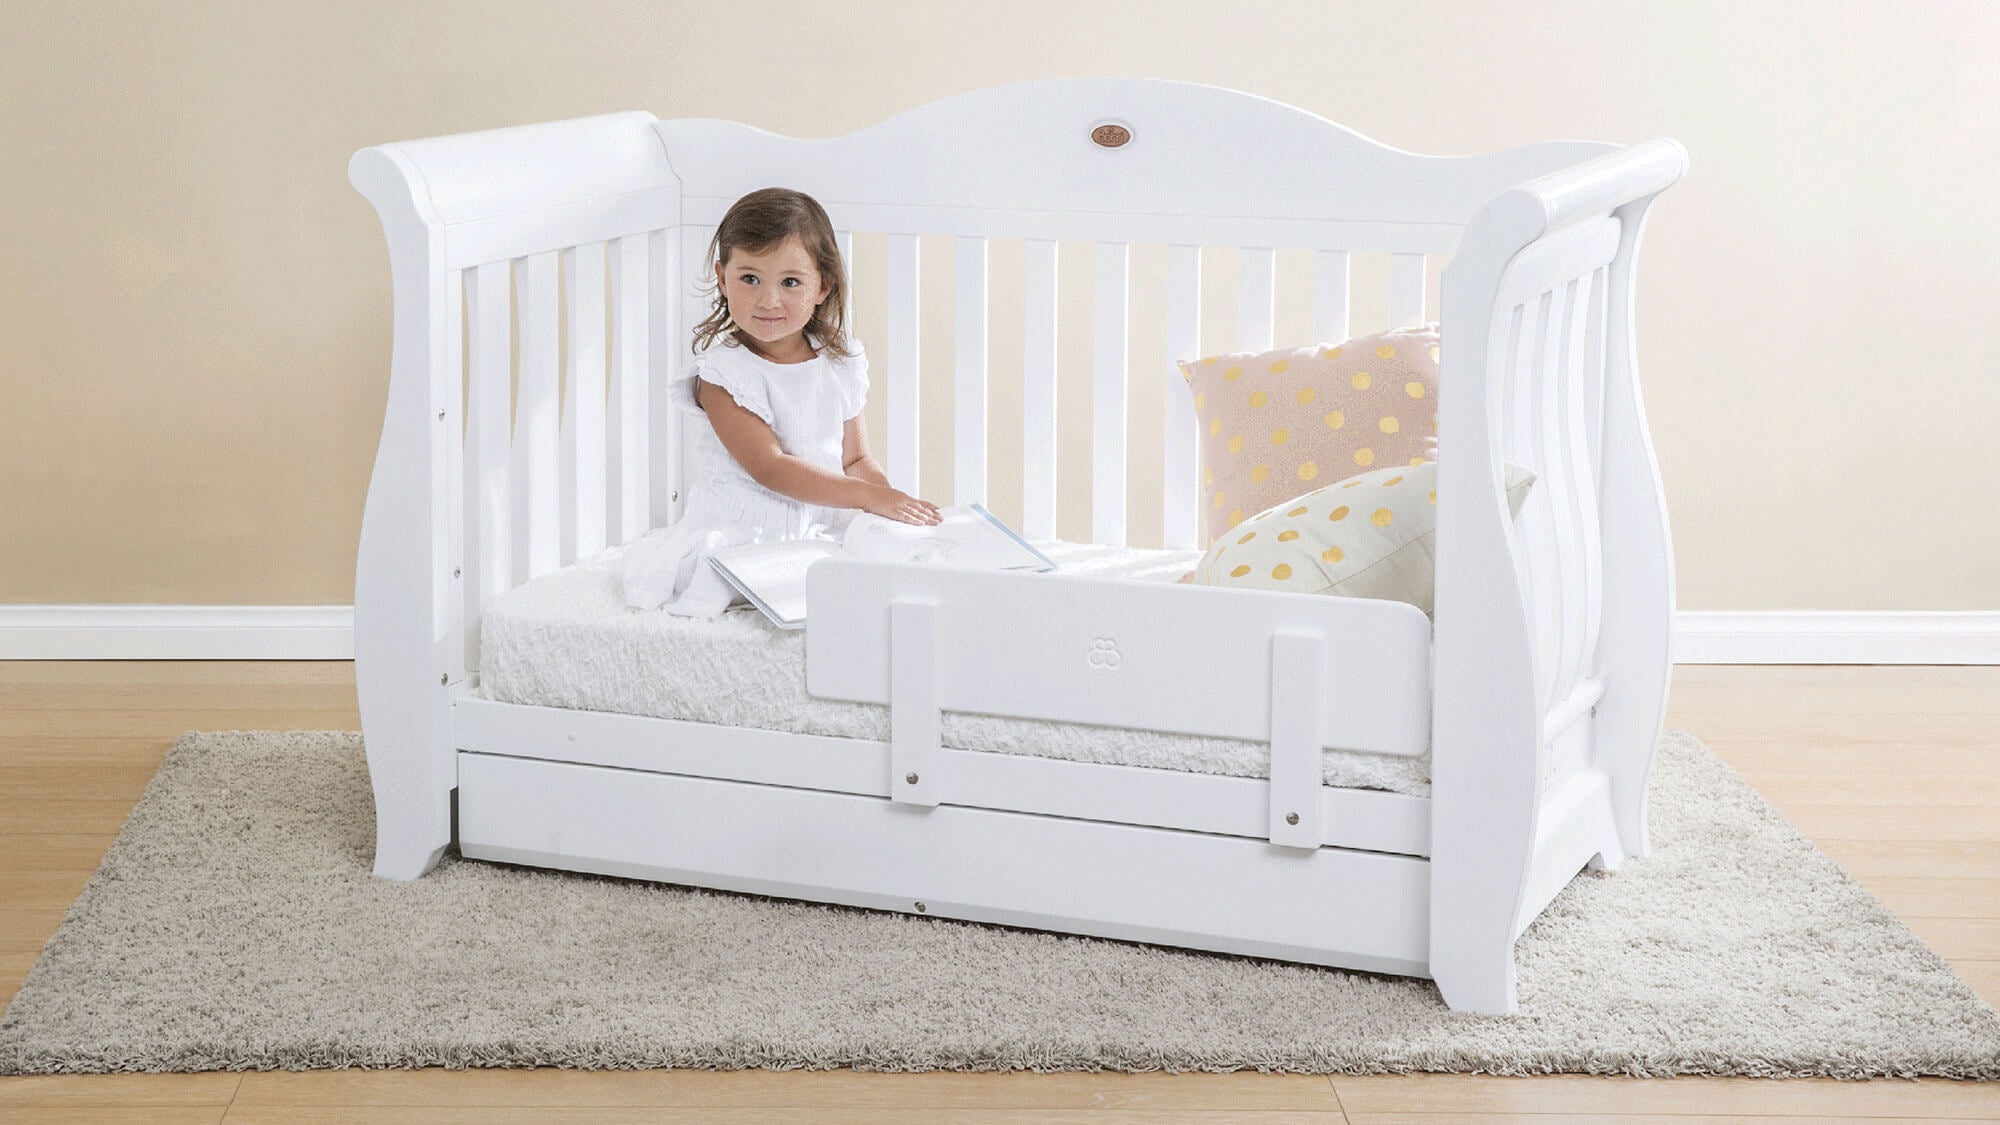 Sleigh Royale Cot Bed in toddler bed mode